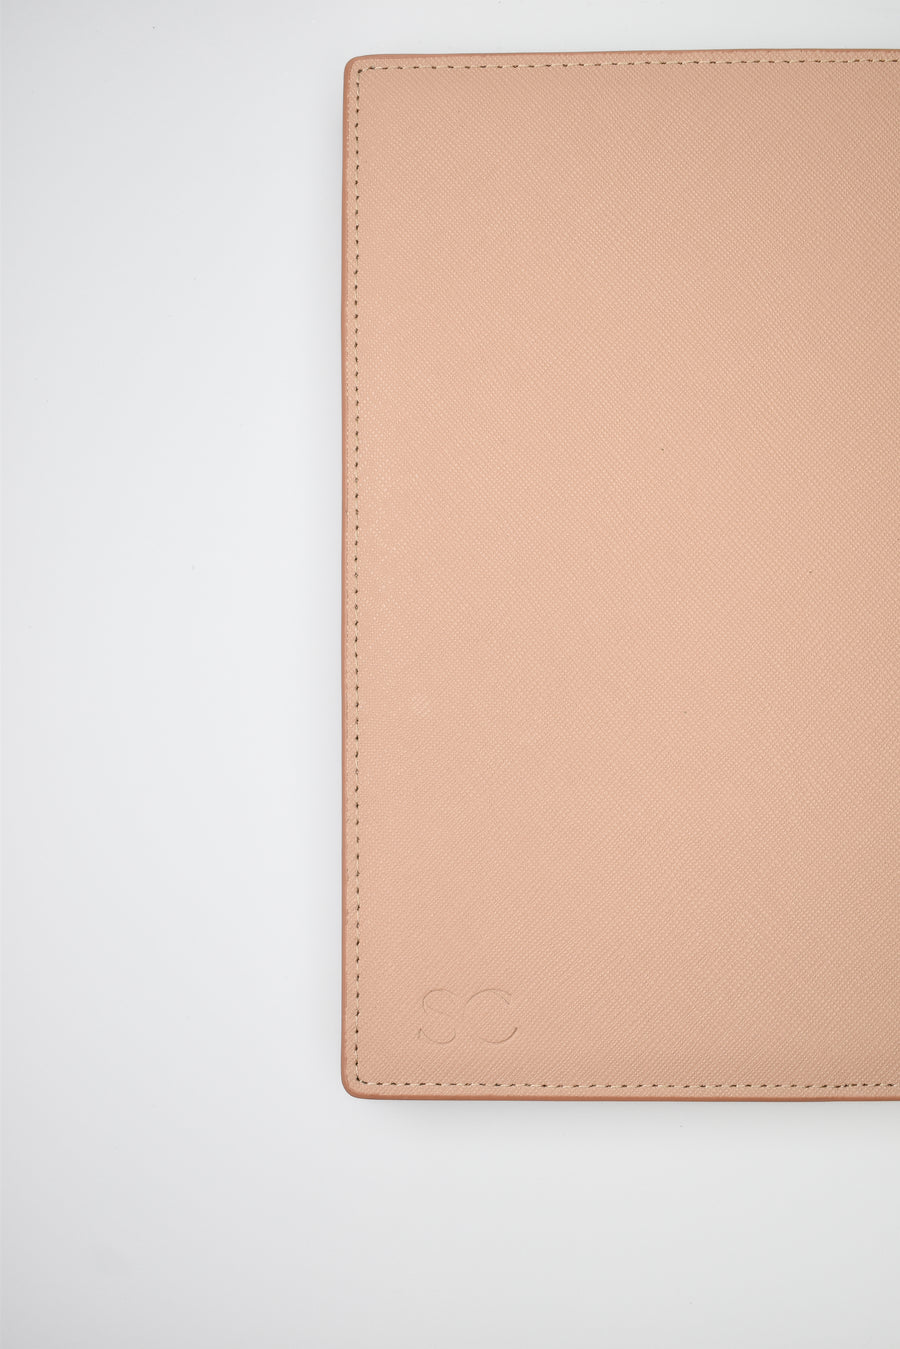 Saffiano Leather Notebook - Sandy Beige - The Best Kind